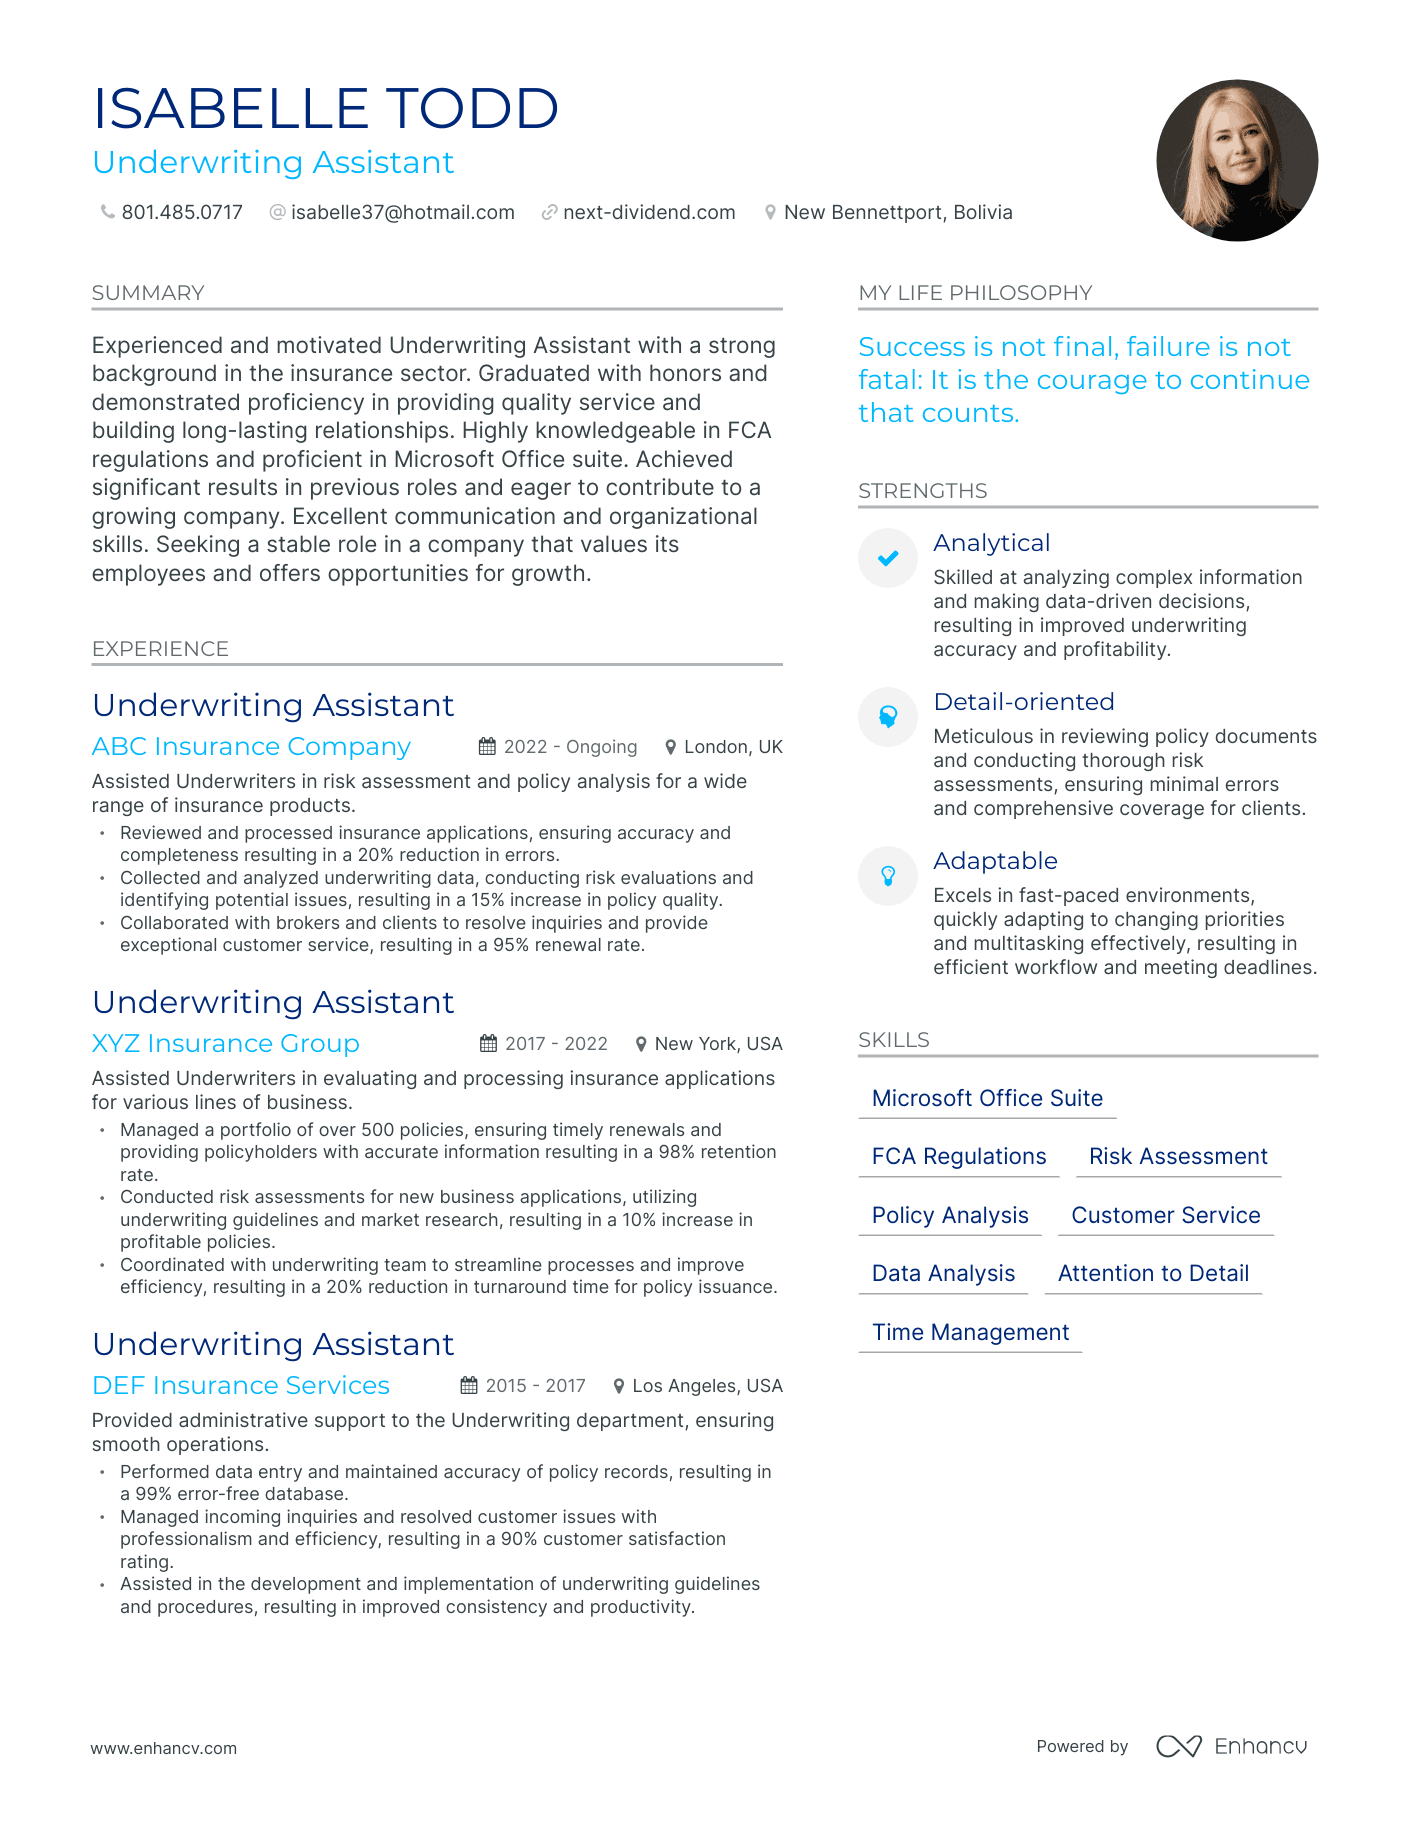 Underwriting Assistant resume example